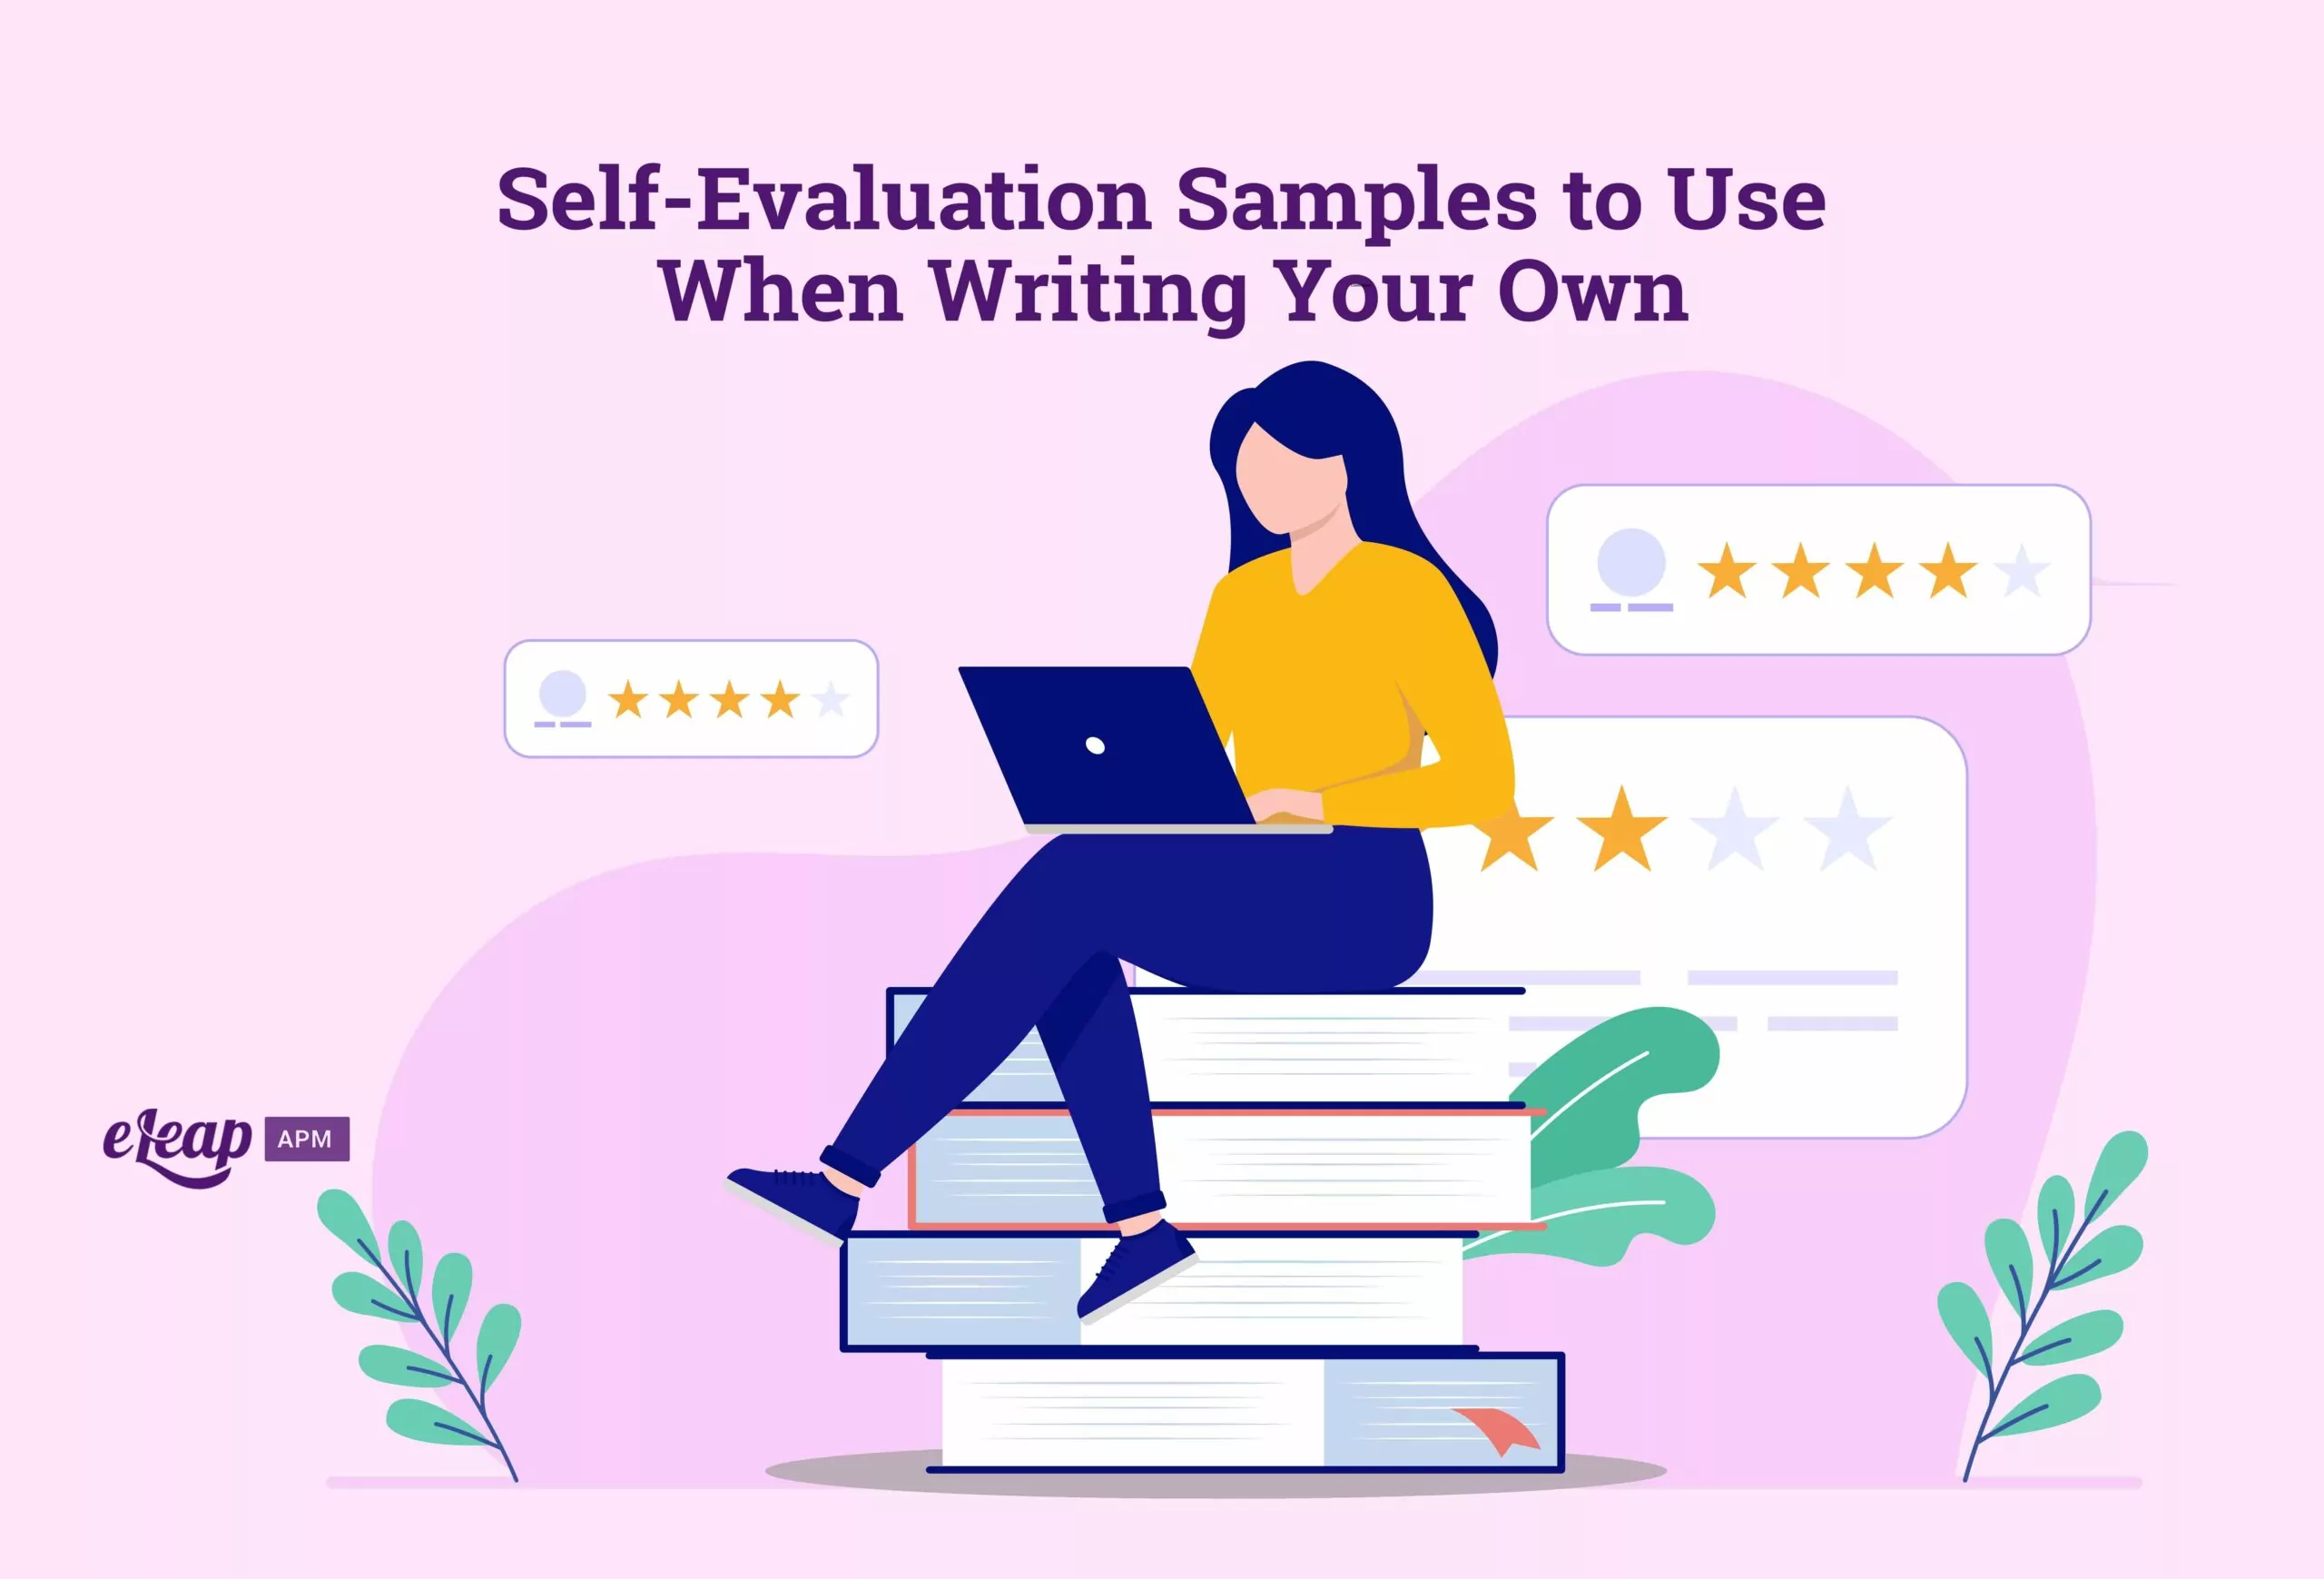 Self-Evaluation Samples to Use When Writing Your Own